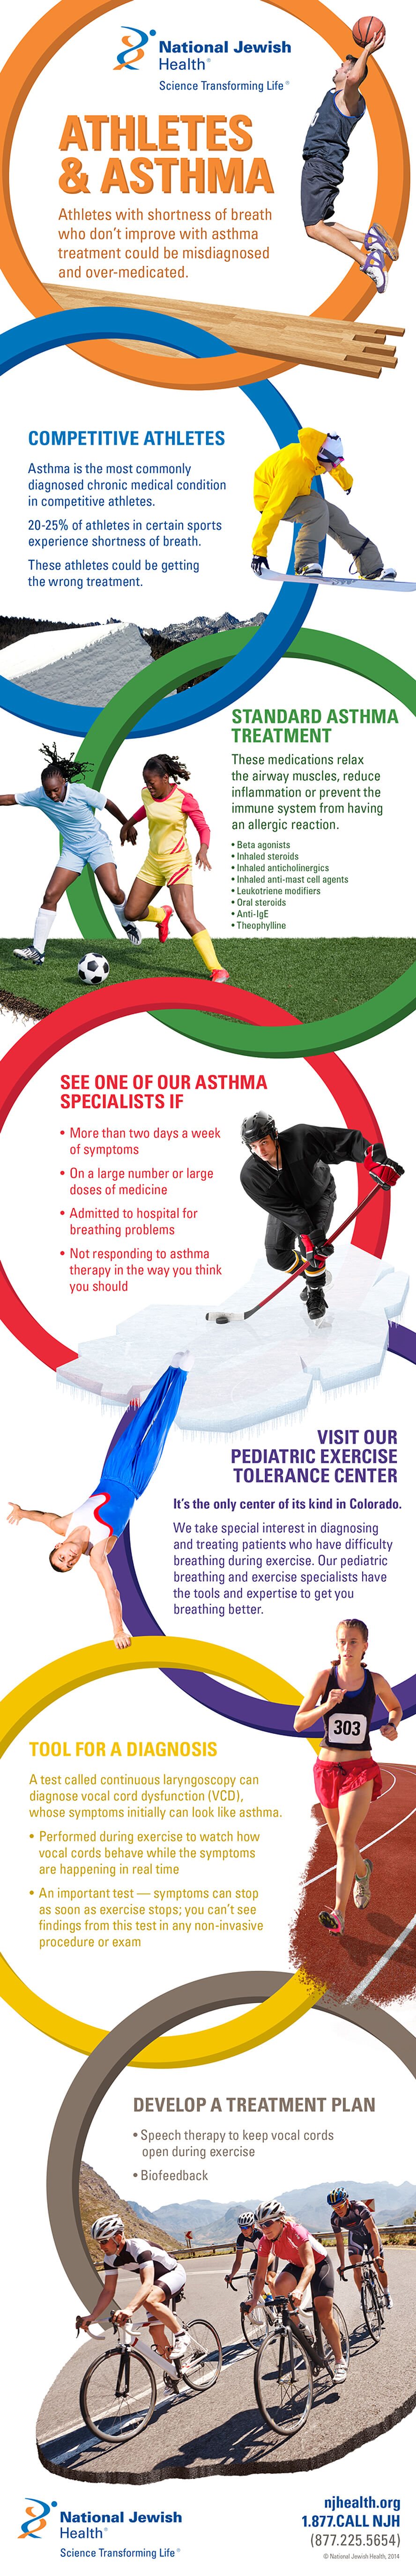 Athletes and Asthma infographics